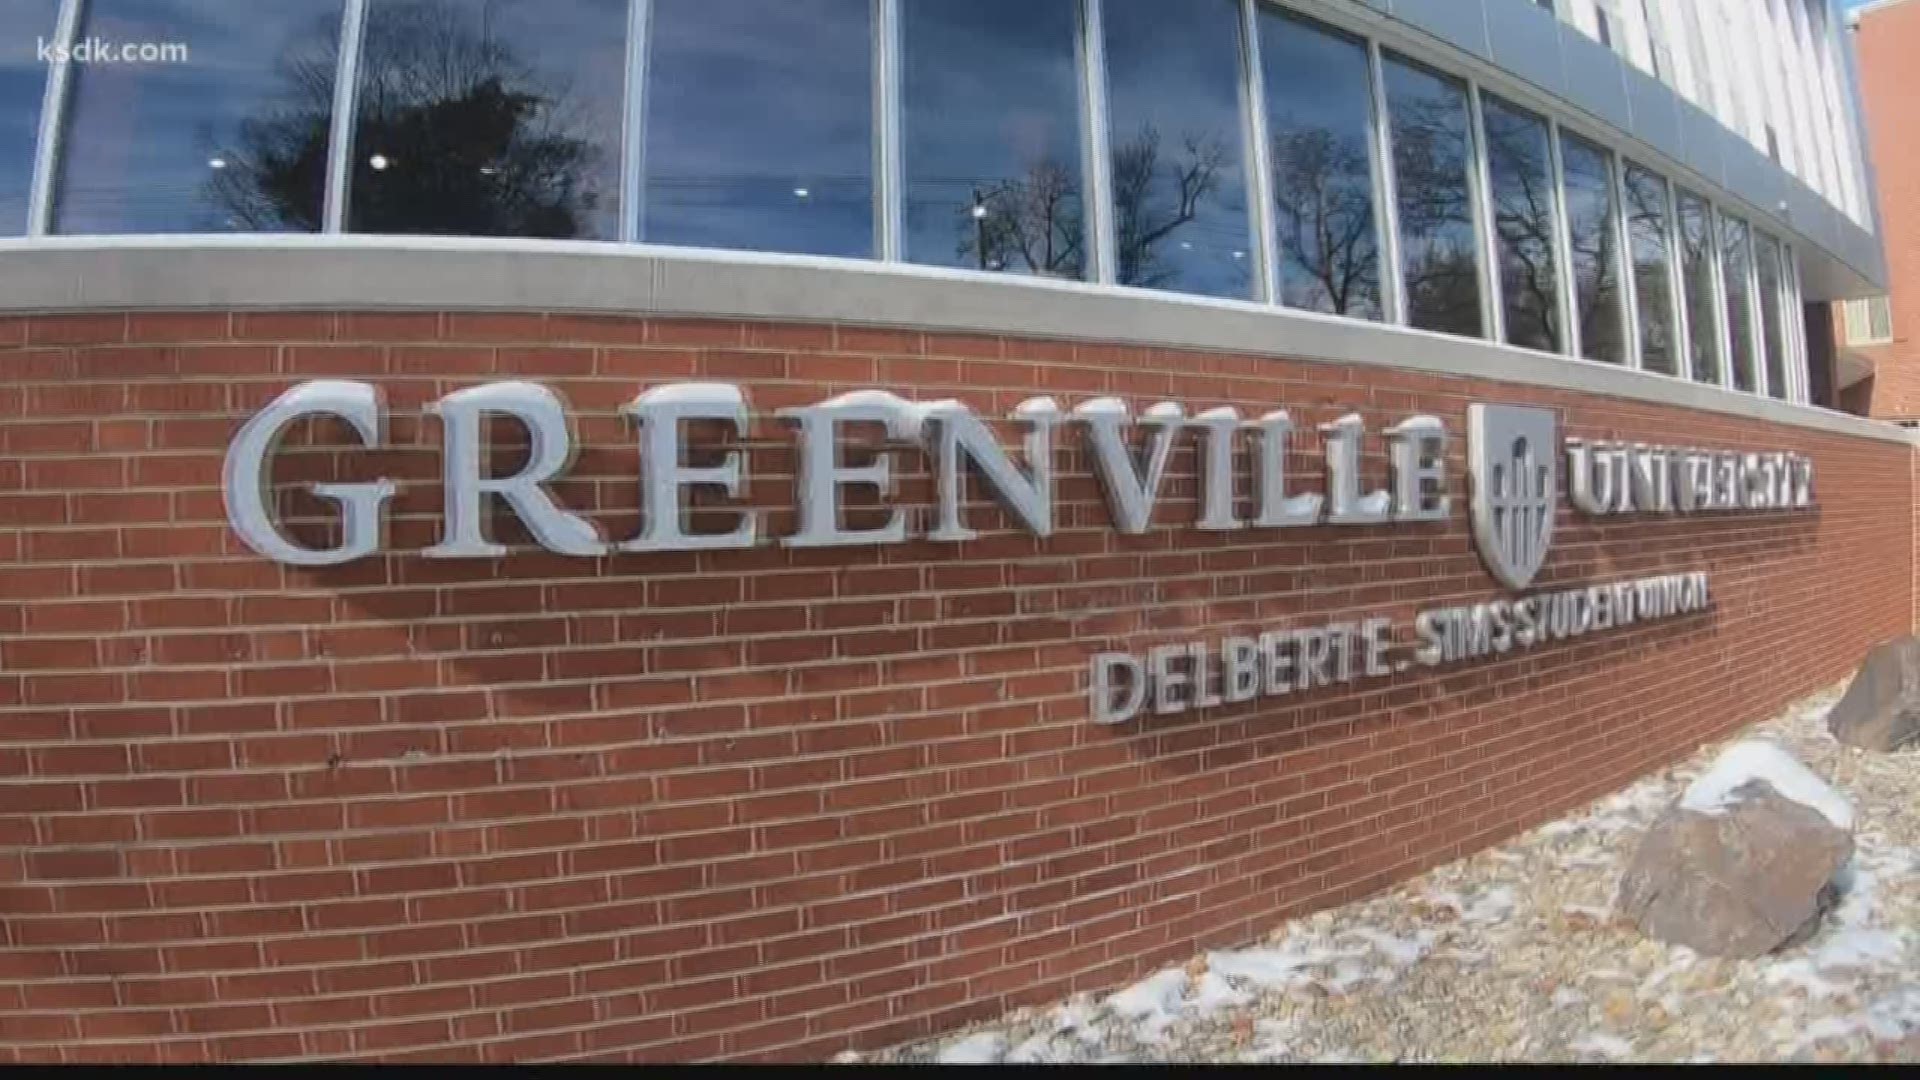 To find their perfect student, Greenville University in Illinois has the Panther Preferred Scholarship. Rhyan Henson explains why it’s about more than good grades.